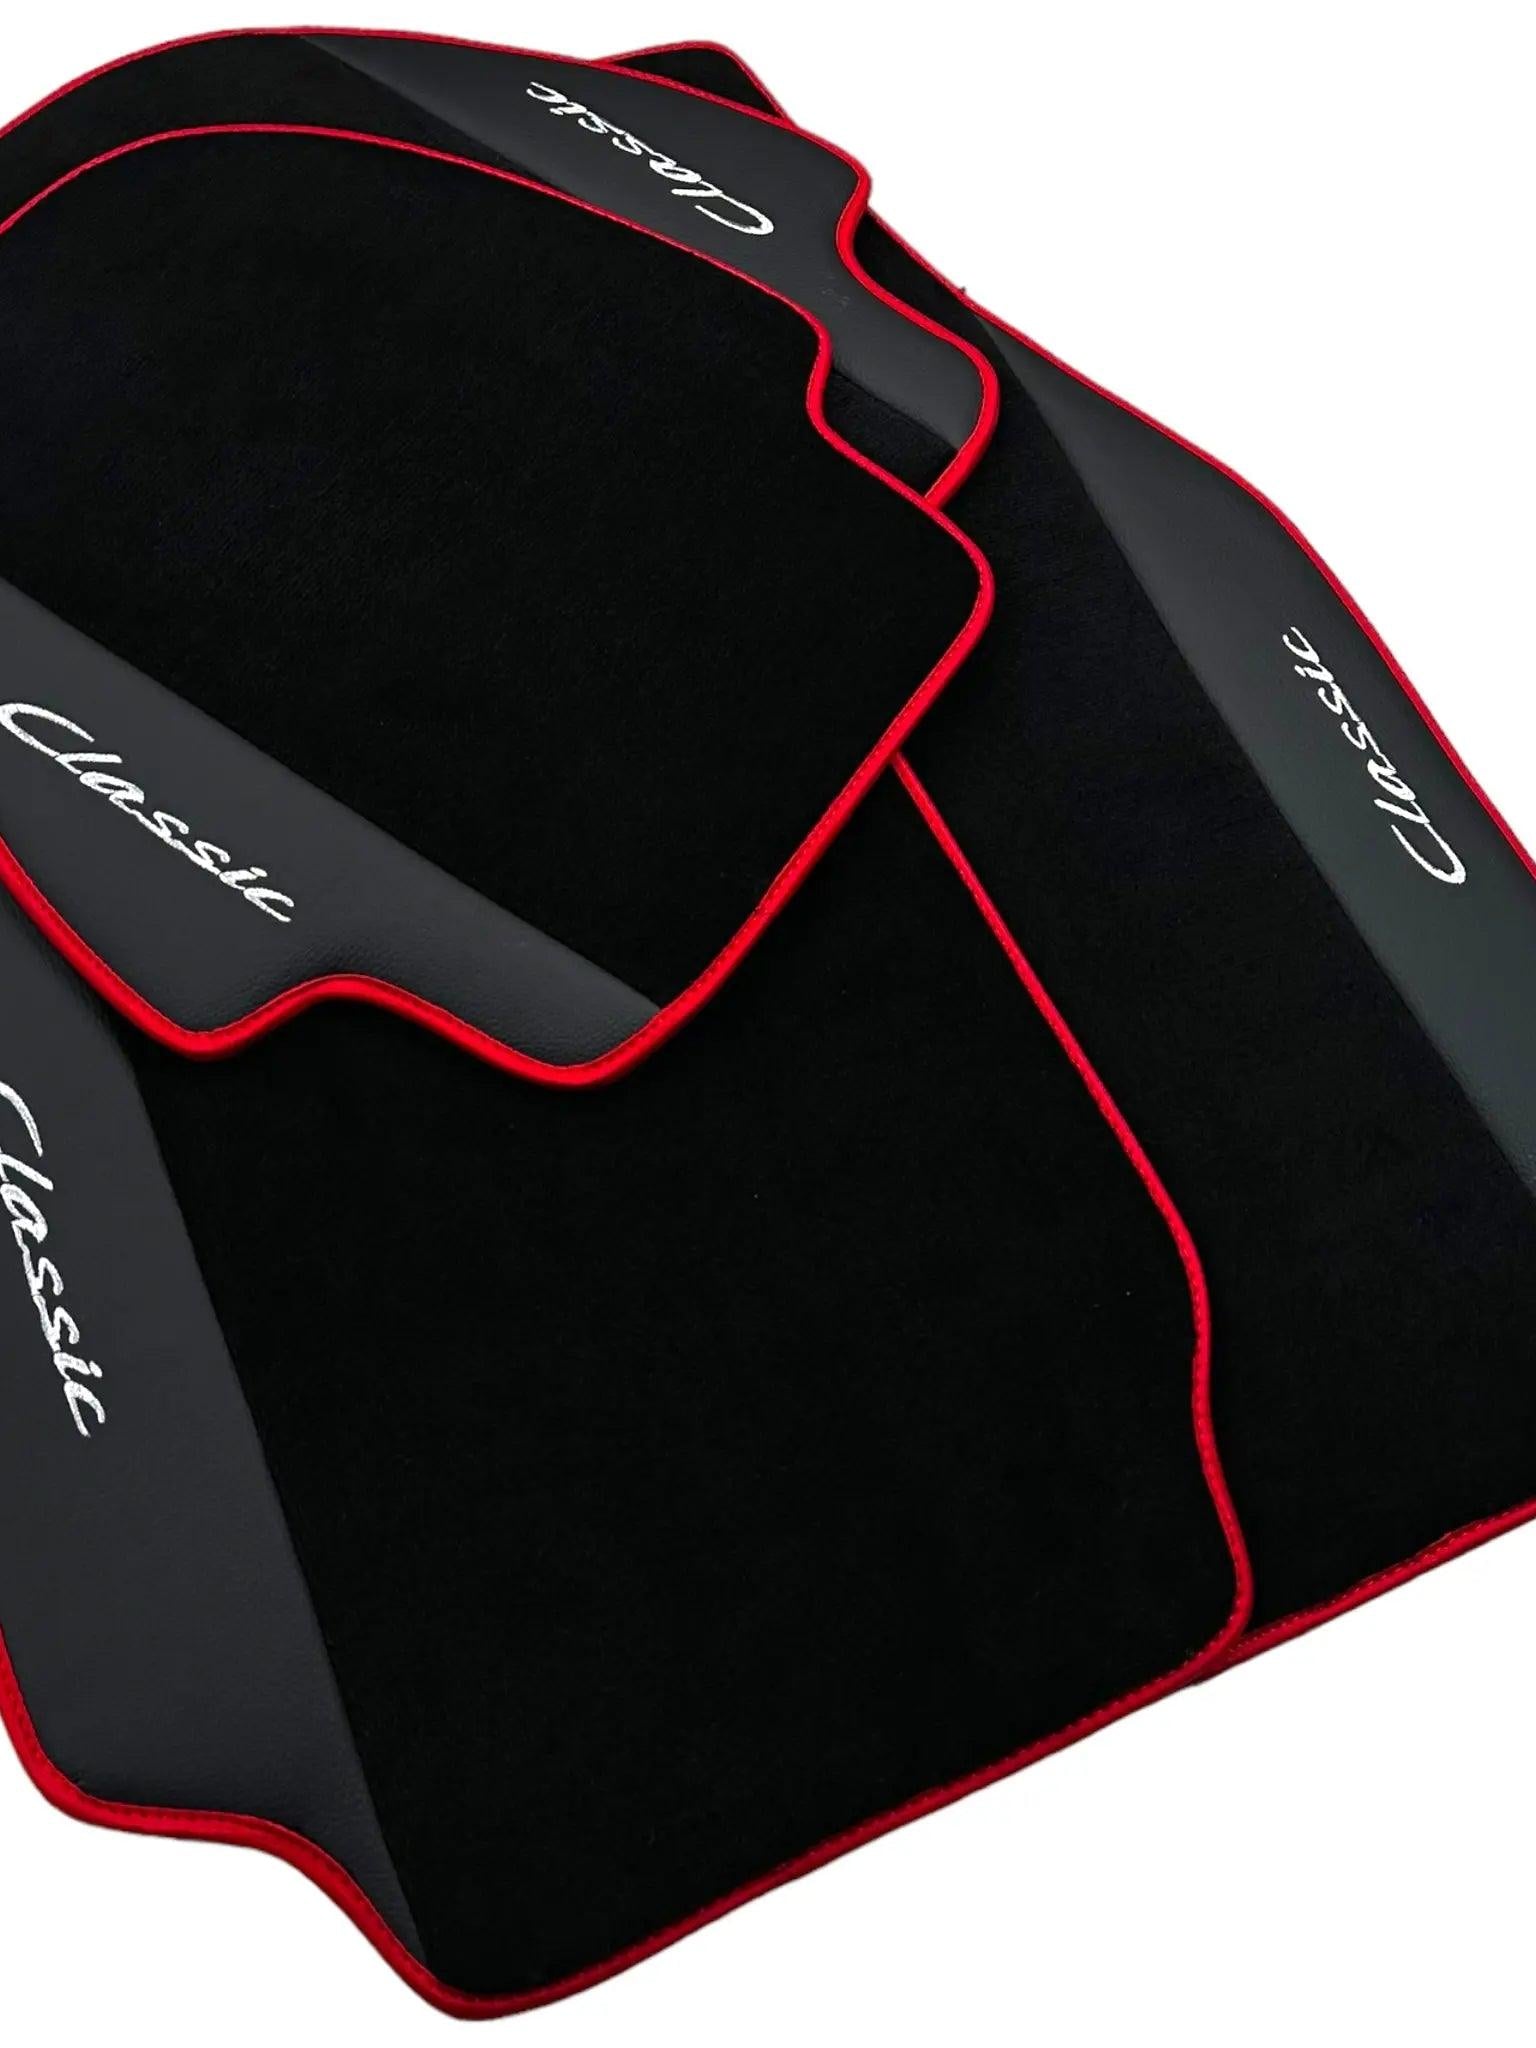 Leather Floor Mats for Porsche Classic 911 (1963-1989) with Red Trim